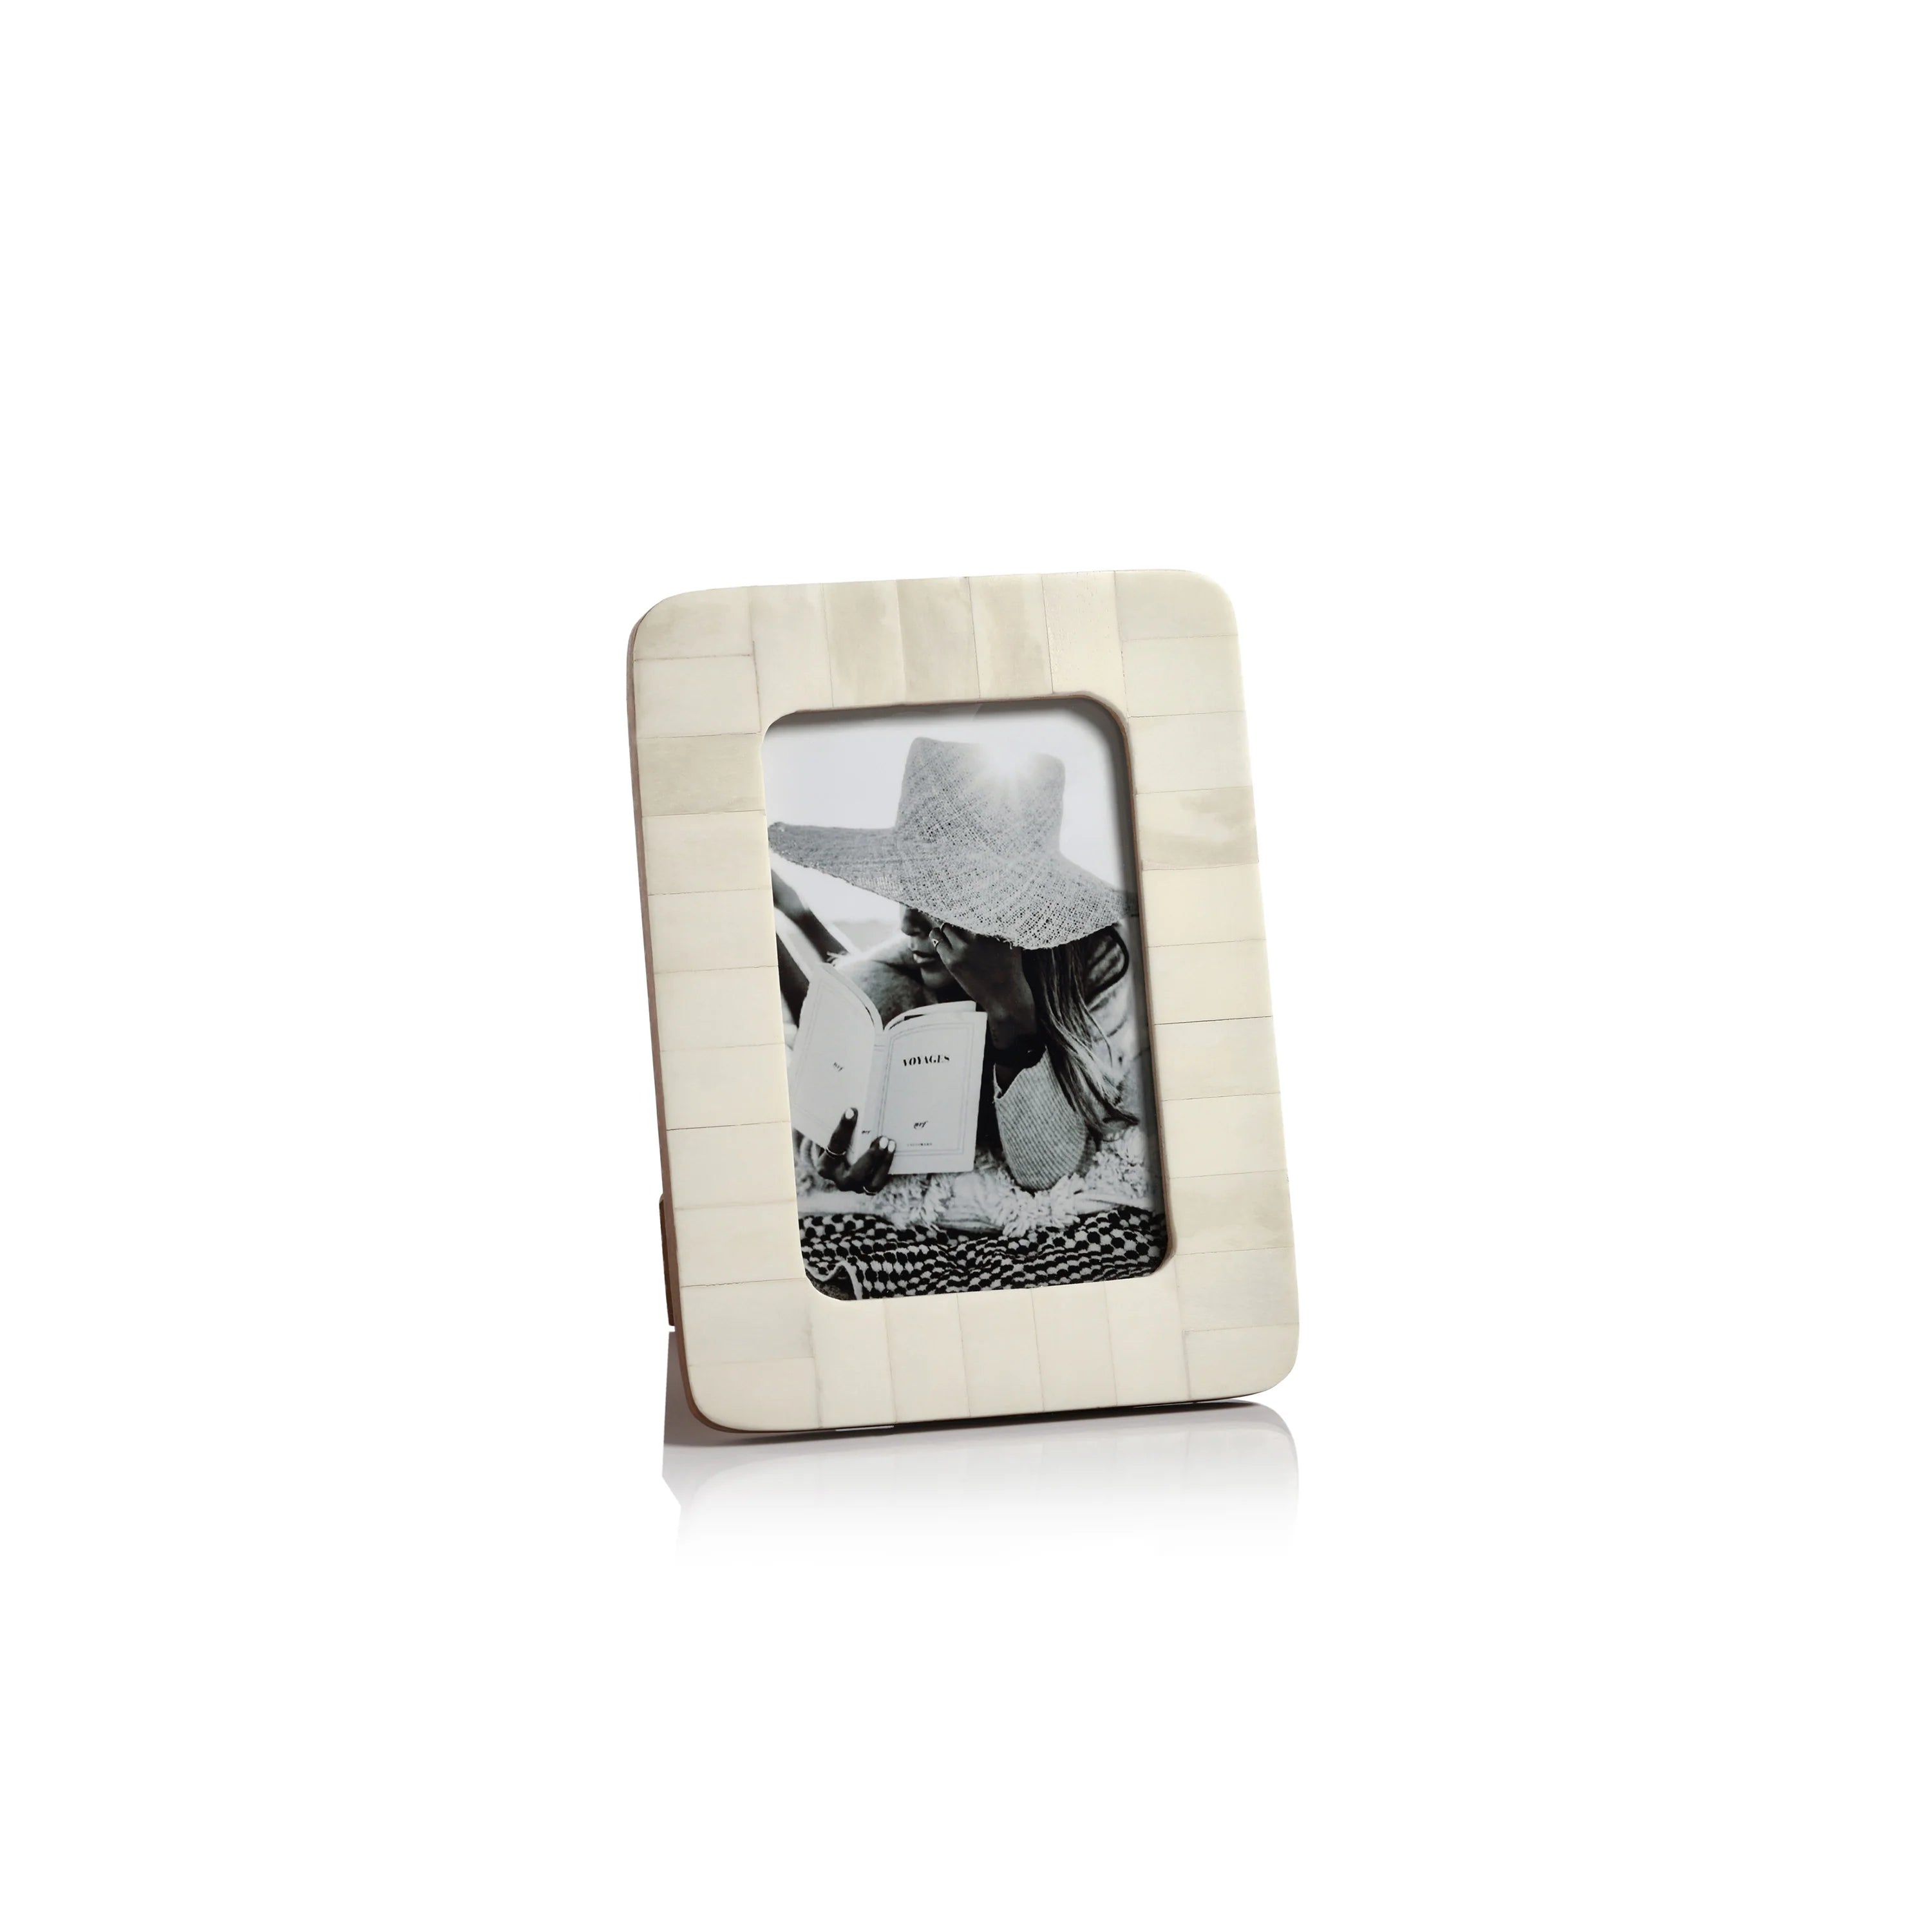 Côte d'Ivoire White Bone Inlay Photo Frame with Rounded Corners